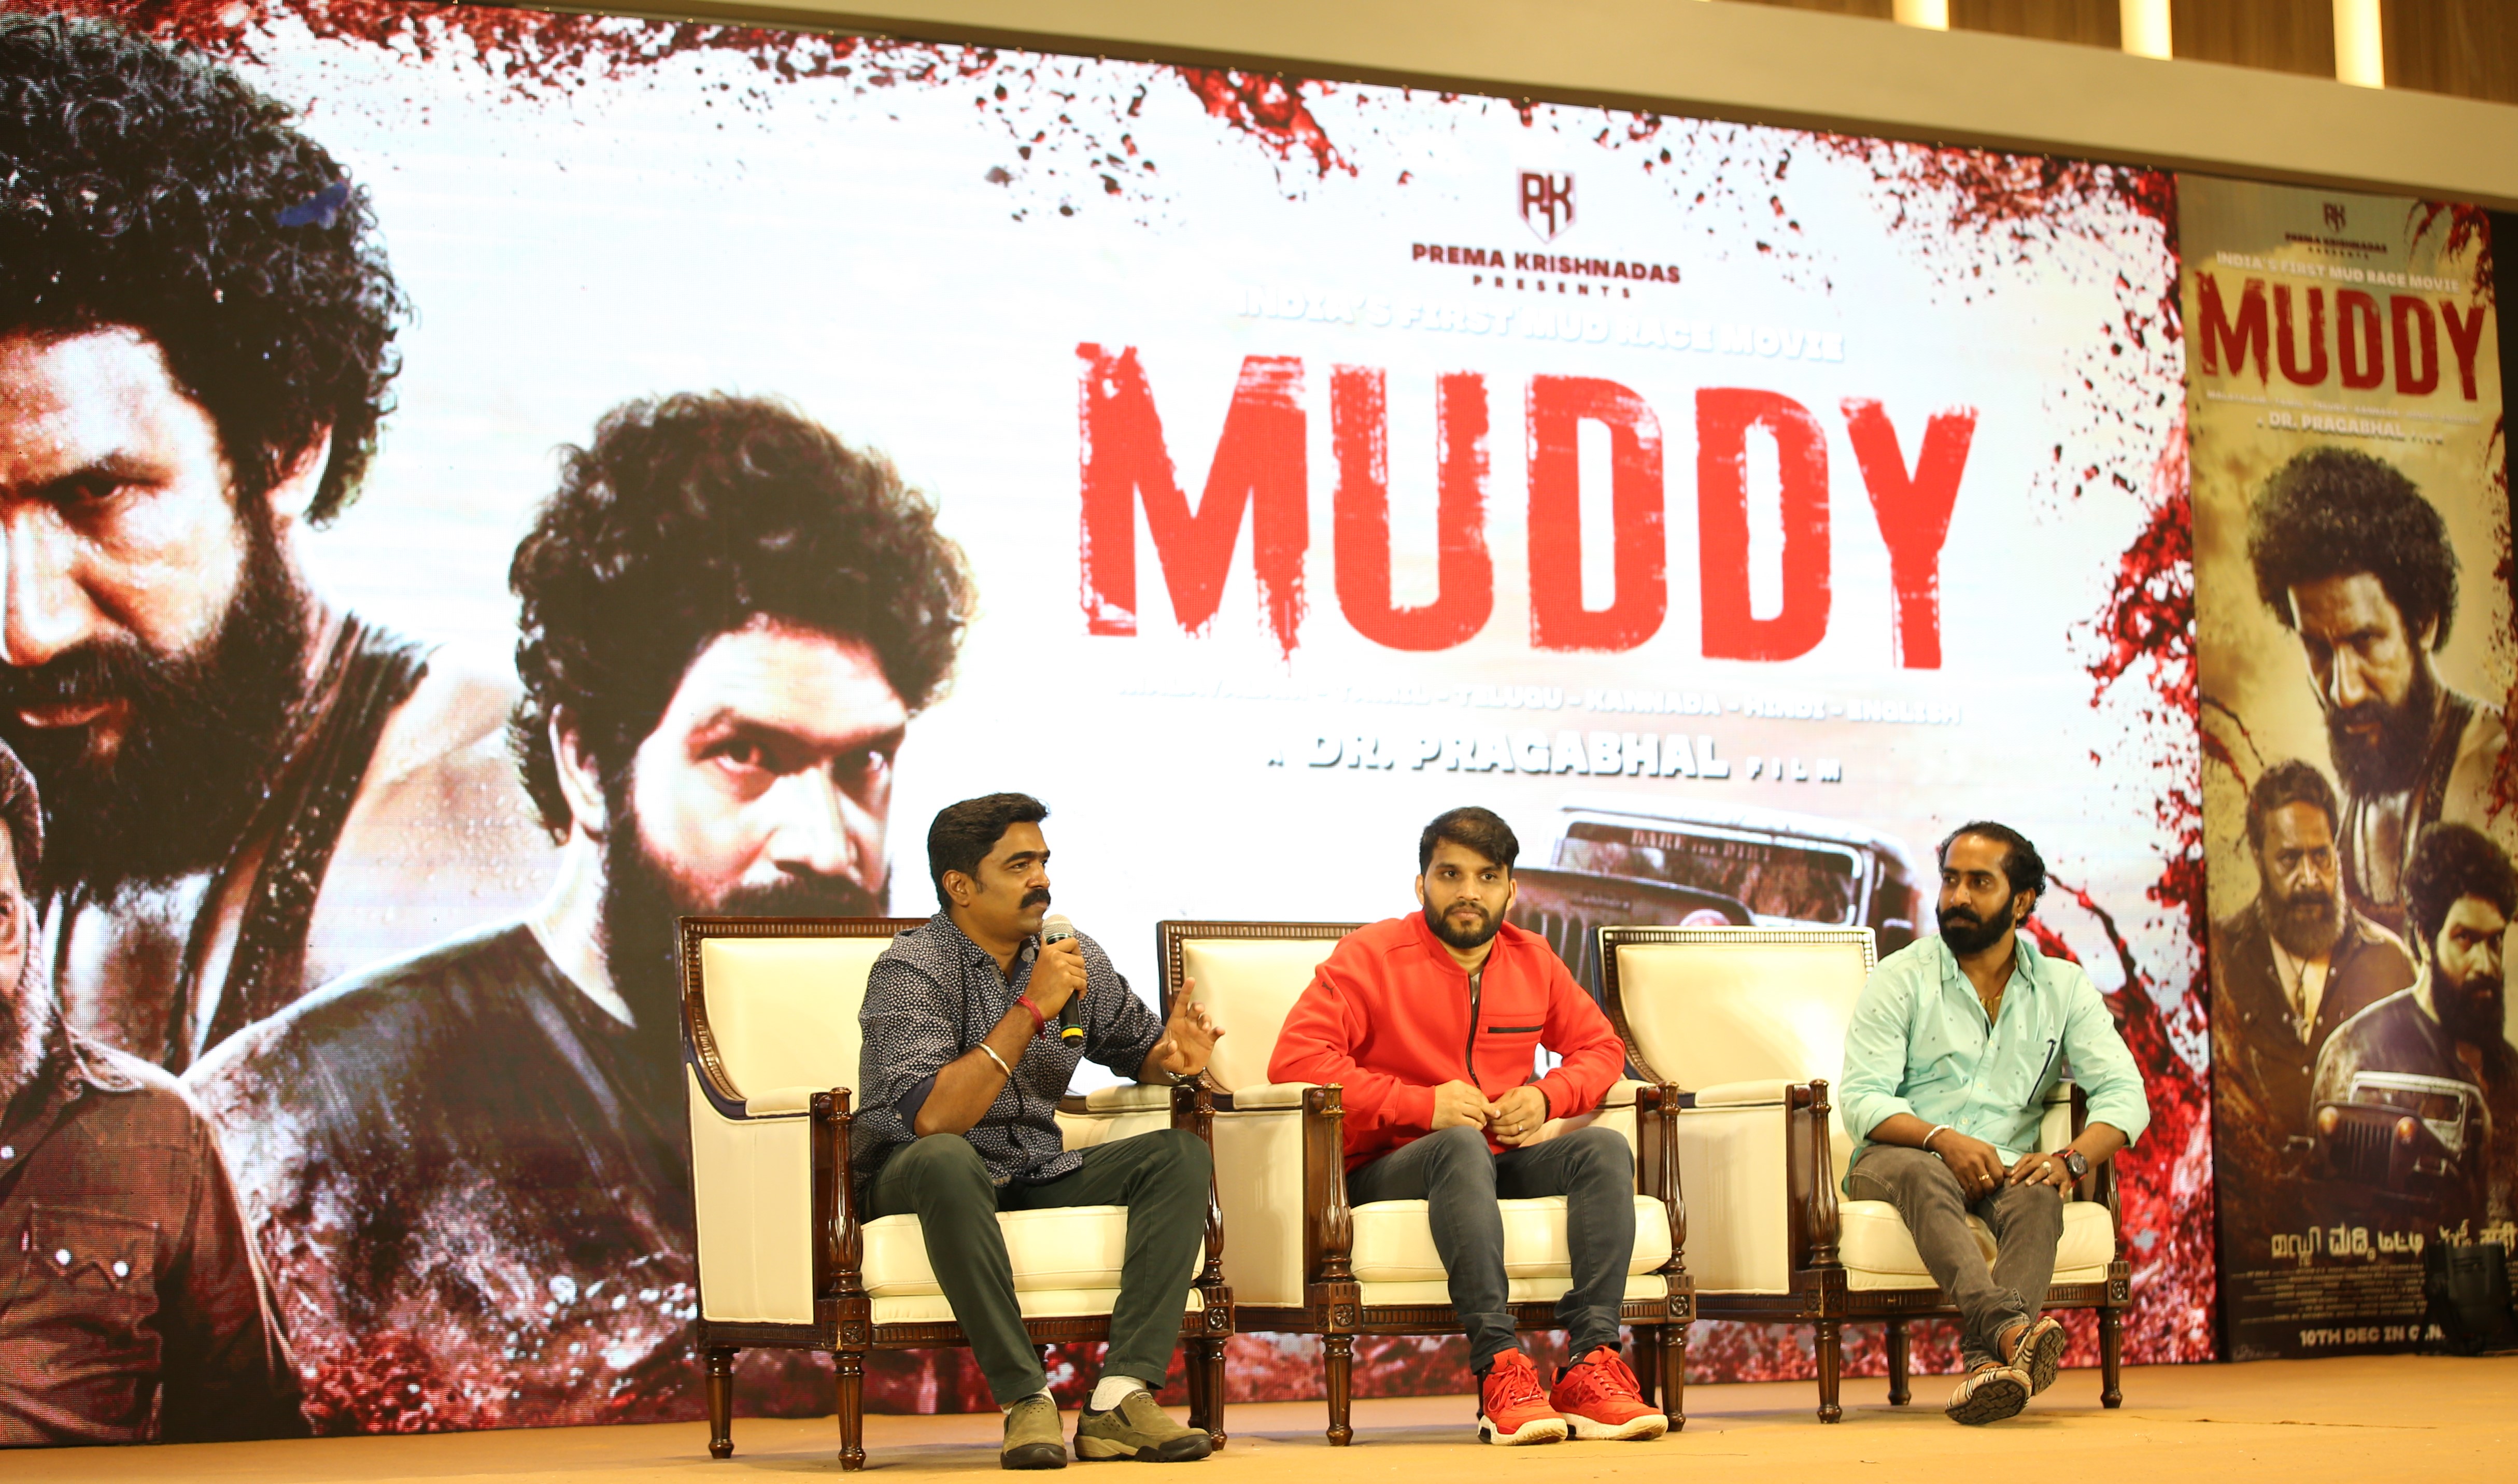 The first 4X4 mud race film in India to be released on December 10, 2021